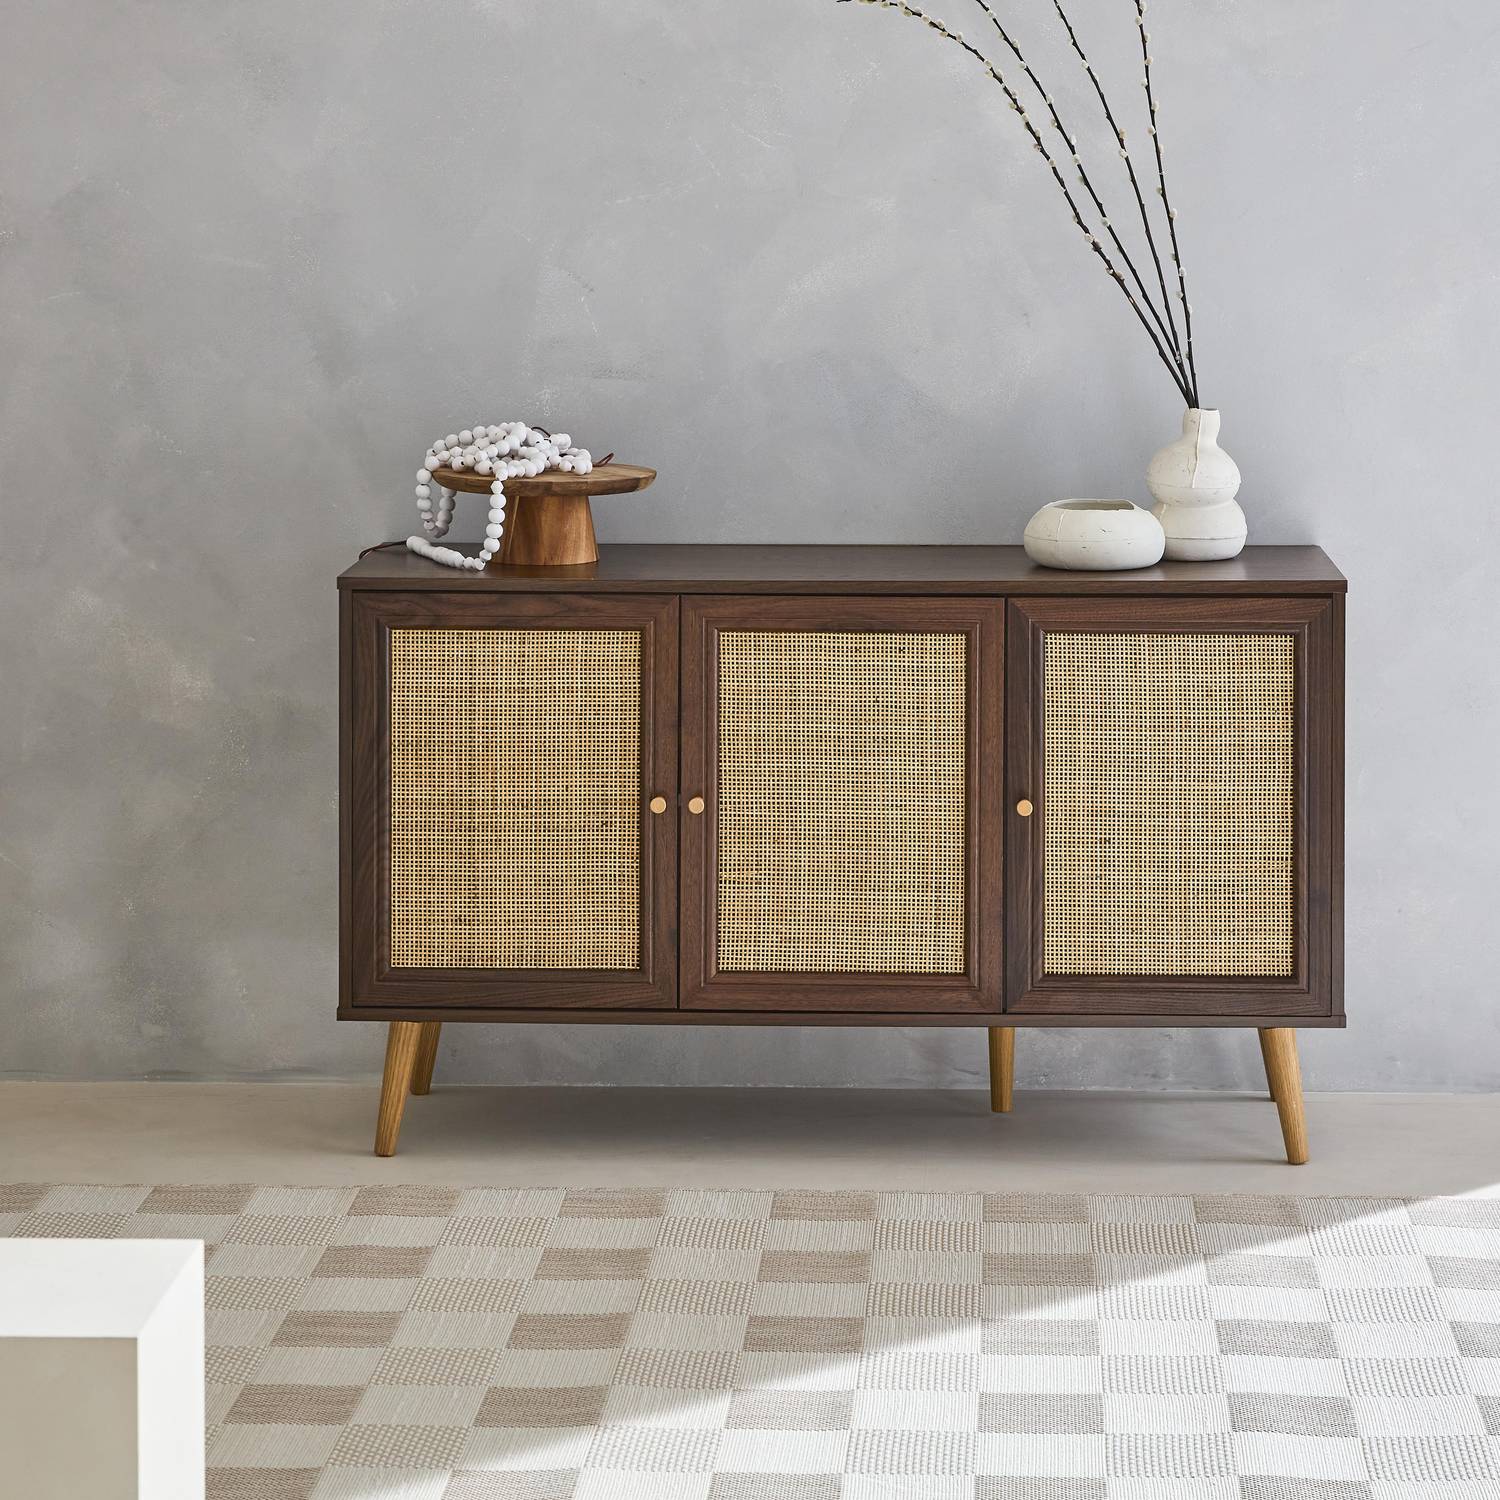 Wooden and cane rattan detail sideboard with 3 doors, 2 shelves, Scandi-style legs, 120x39x70cm - Boheme - Dark wood colour Photo1